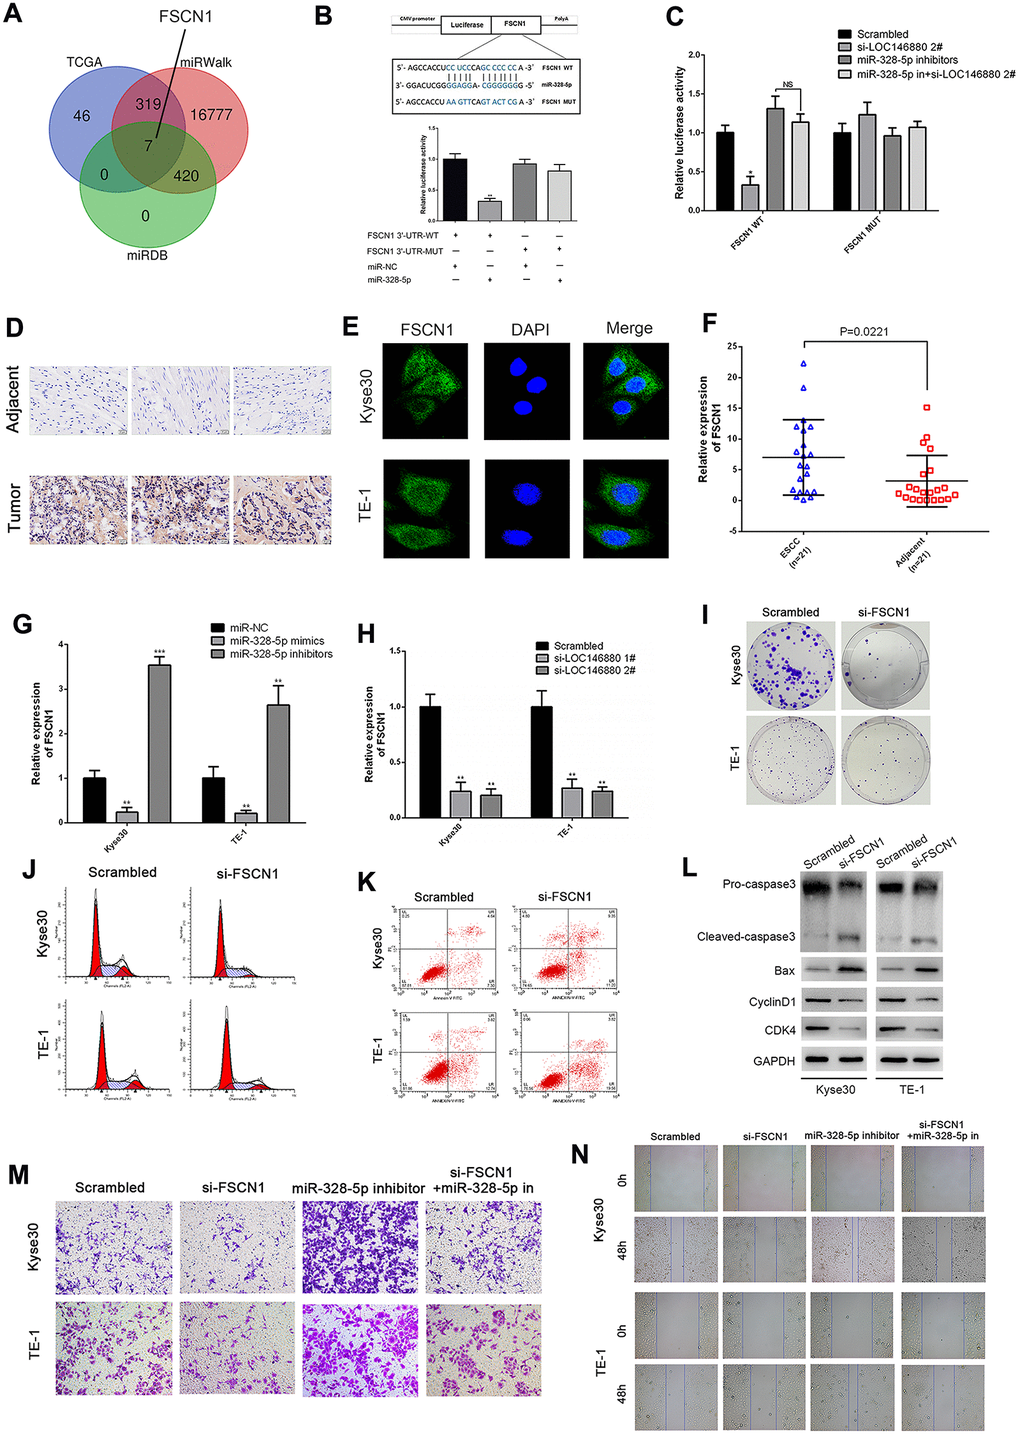 FSCN1 is a direct target of miR-328-5p and enhances the progression of ESCC cells. (A) TCGA, miRDB and miRWalk database analyses show that FSCN1 is a potential miR-328-5p target gene (FGF19, EN1, ADAM8, ELFN2, FSCN1, CLDN6, IFIT1). (B) The predicted miR-328-5p seed region in the wild-type (WT) and mutated (Mut) 3′UTR of FSCN1 is shown in the top panel. Dual luciferase reporter assay results (bottom panel) show relative luciferase activity of Kyse30 cells co-transfected with luciferase reporter plasmids containing wild-type or mutated 3′UTR of FSCN1 (WT or Mut) and miR-328-5p mimics, miR-NC act as control. (C) Dual luciferase reporter assay results show luciferase activity in control or LOC146880-silenced Kyse30 cells transfected with luciferase reporter vector with wild-type or mutated 3′UTR of FSCN1 plus miR-NC or miR-328-5p inhibitors. (D) IHC assay shows higher FSCN1 expression level in tumor tissues than in adjacent tissues. (E) ICC assay shows localization of FSCN1 in the cytoplasm and nucleus of ESCC cells. (F–H) QRT-PCR analysis shows expression levels of FSCN1 transcripts in (F) 21 pairs of esophageal cancer and adjacent normal esophageal tissues, (G) ESCC cells transfected with miR-NC, miR-328-5p mimics, and miR-328-5p inhibitors, and (H) control and LOC146880-silenced ESCC cells. (I) Colony formation assay results show the viability of si-NC and si-FCSN1-transfected Kyse30 and TE-1 cells. (J–K) Flow cytometry analysis shows (J) apoptotic rate and (K) cell cycle distribution of si-NC and si-FCSN1-transfected Kyse30 and TE-1 cells. (L) Western blot analysis shows the levels of apoptosis-related proteins (cleaved caspase 3 and Bax) and cell cycle proteins (cyclinD1 and CDK4) in si-NC and si-FCSN1-transfected Kyse30 and TE-1 cells. (M–N) Wound-healing and Transwell invasion assay results show (M) migration and (N) invasiveness of si-NC and si-FCSN1-transfected Kyse30 and TE-1 cells. *P **P ***P 